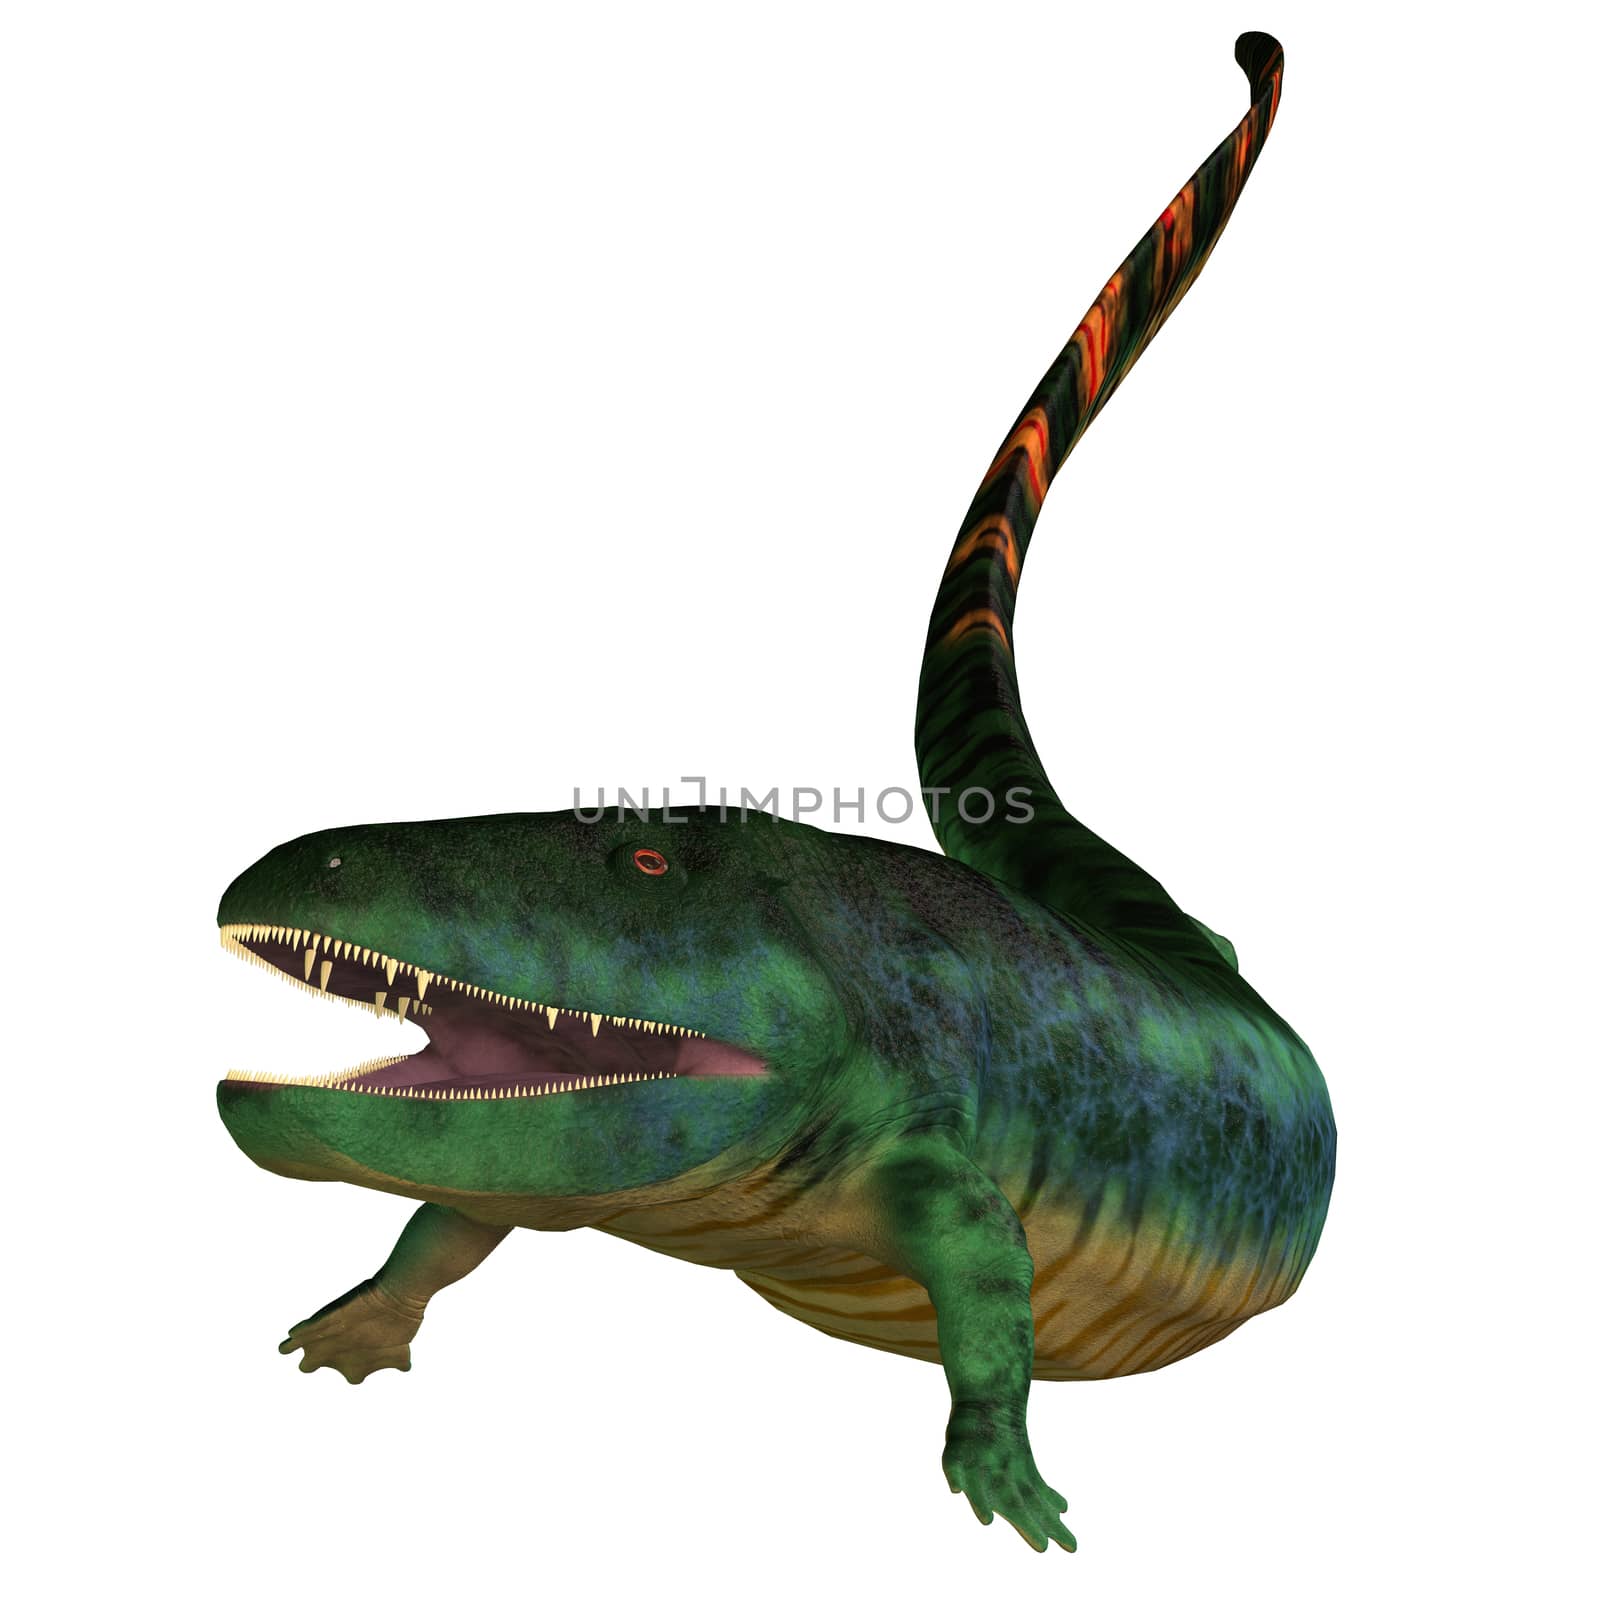 Eogyrinus was a aquatic predatory tetrapod that lived in the Carboniferous Period of England.